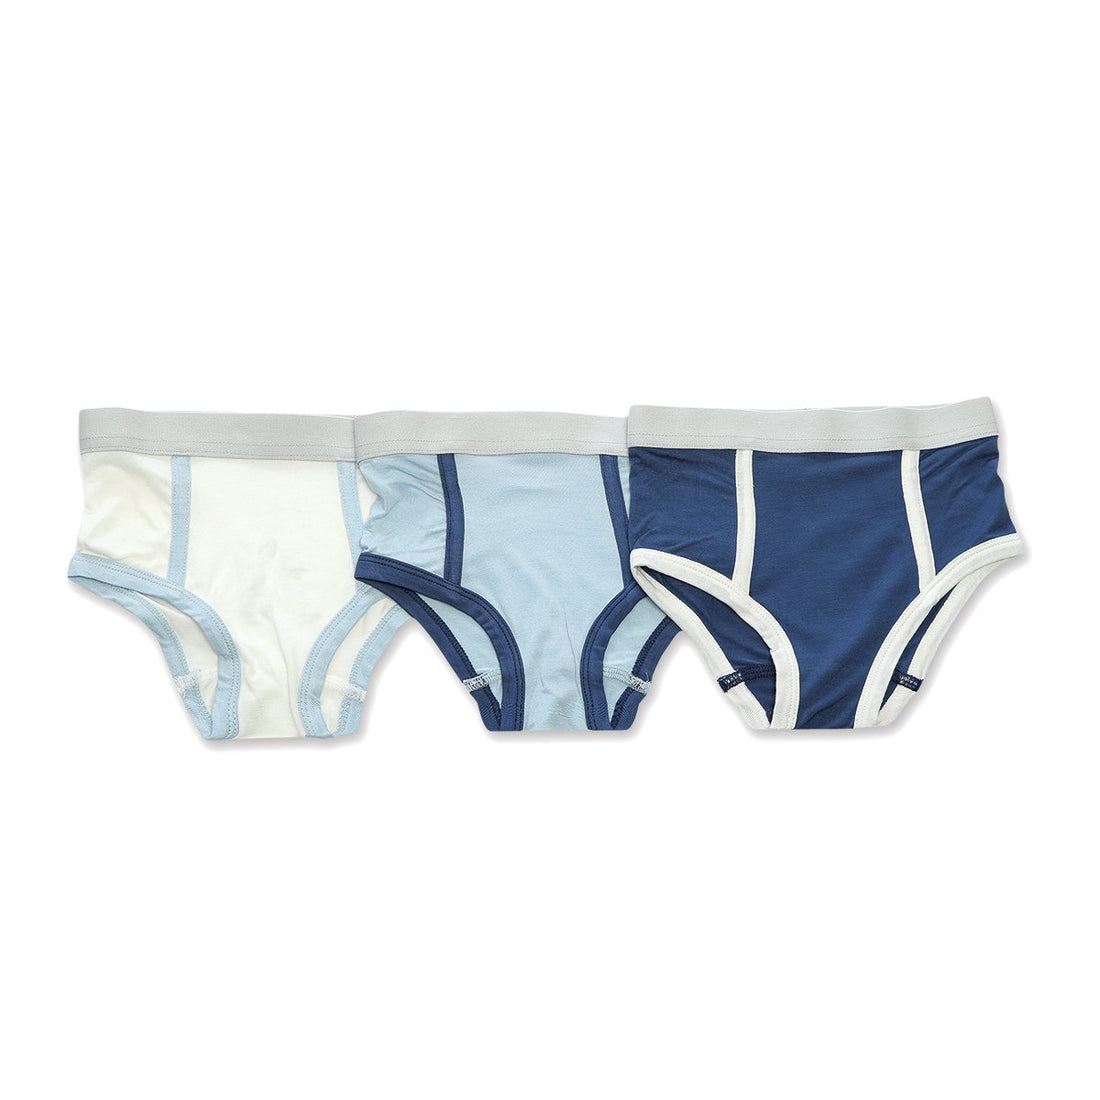 Bamboo Boys Briefs 3 pack (Baby Blue/Captain Navy/Feather)